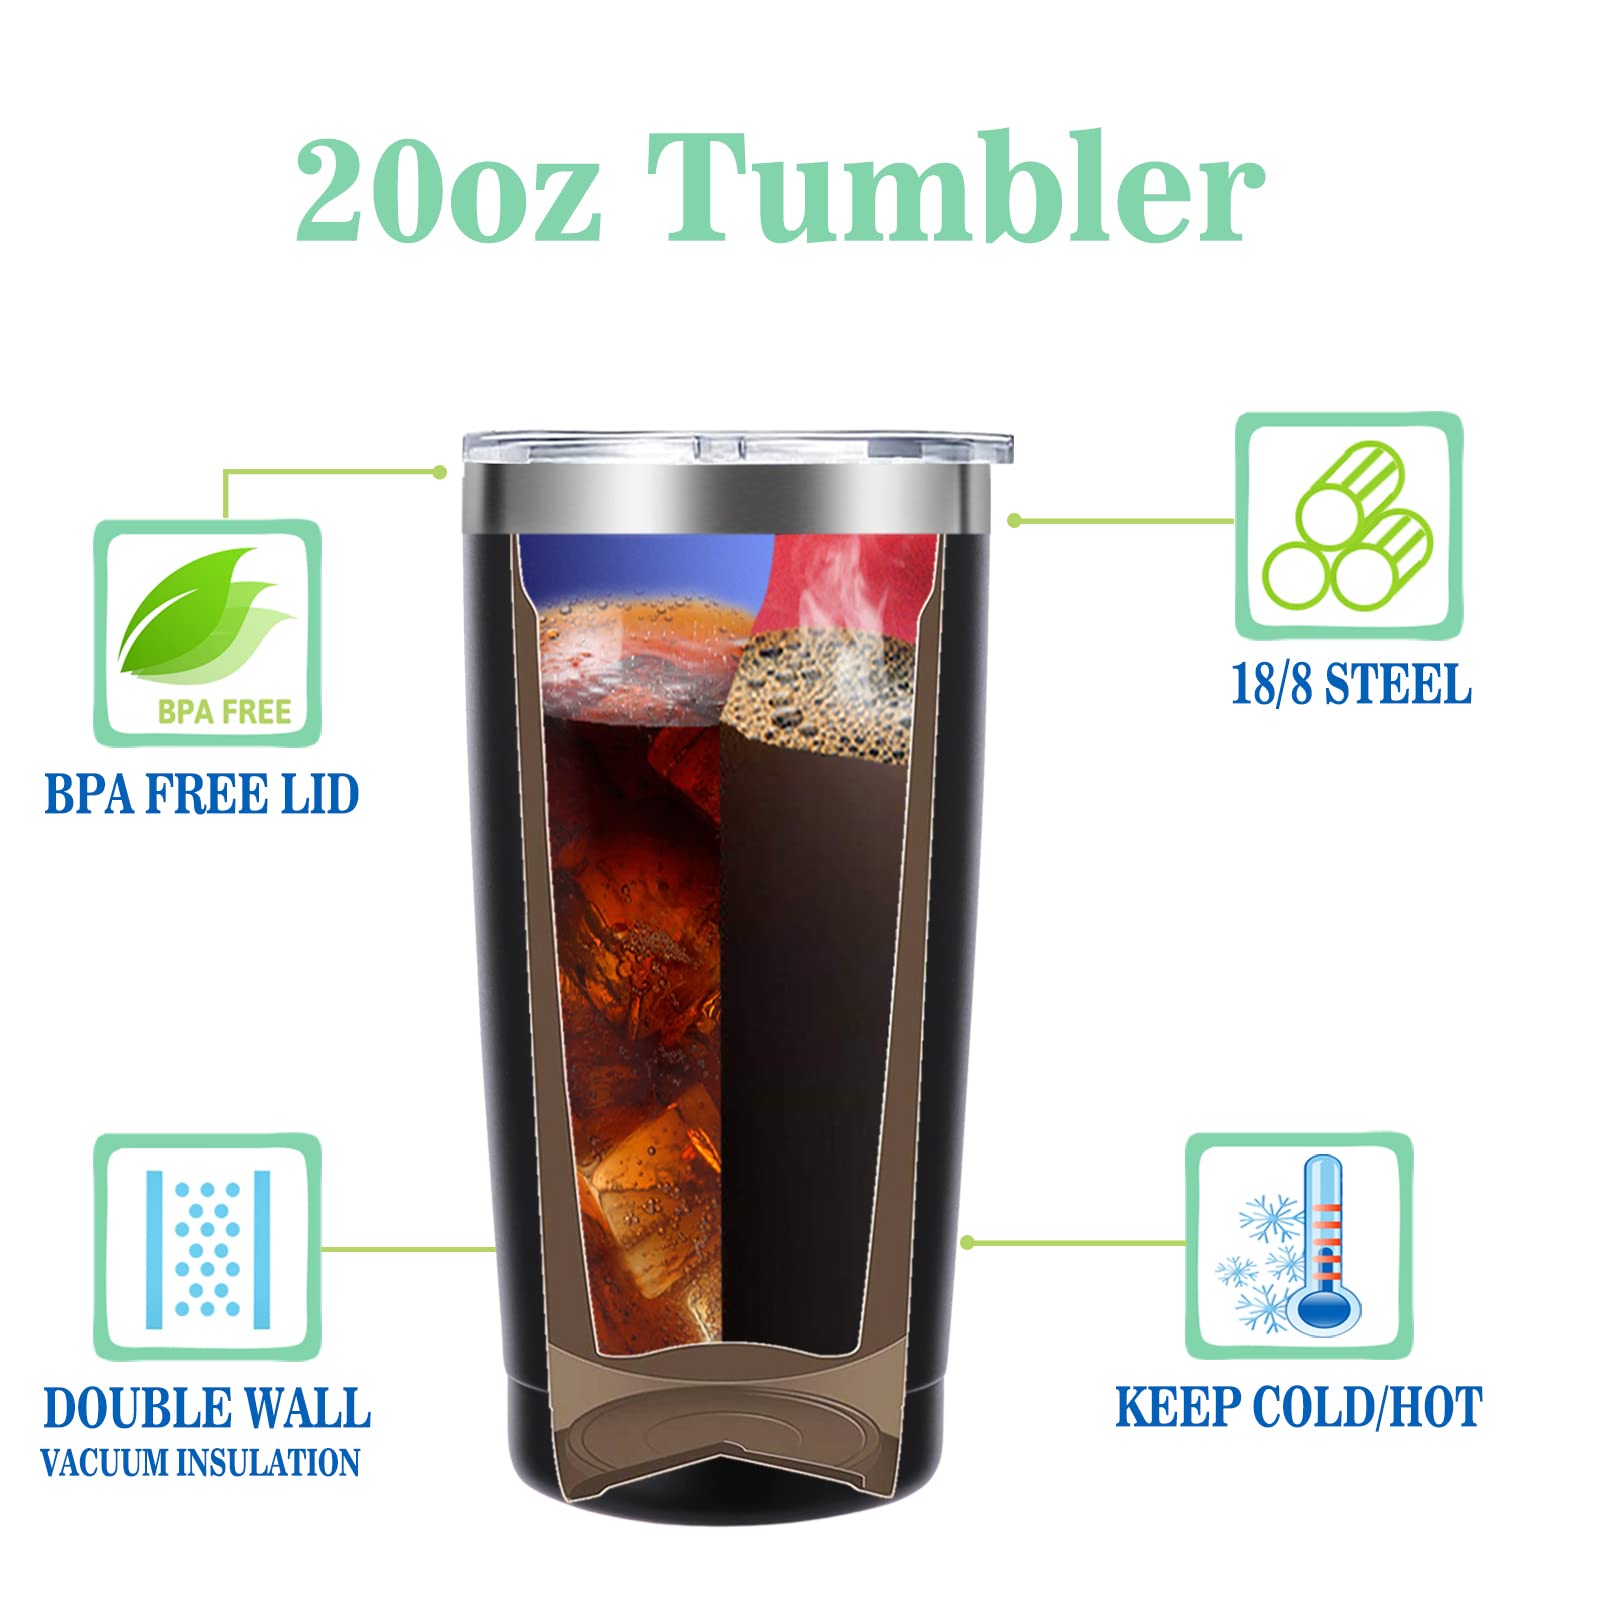 These are the Tears of My Staff 20oz Tumbler Gifts.Boss Day Boss Office Gifts.Funny Gifts for Boss Assistant Coworker.Birthday Christmas Gifts for Boss from Employees.(Black)